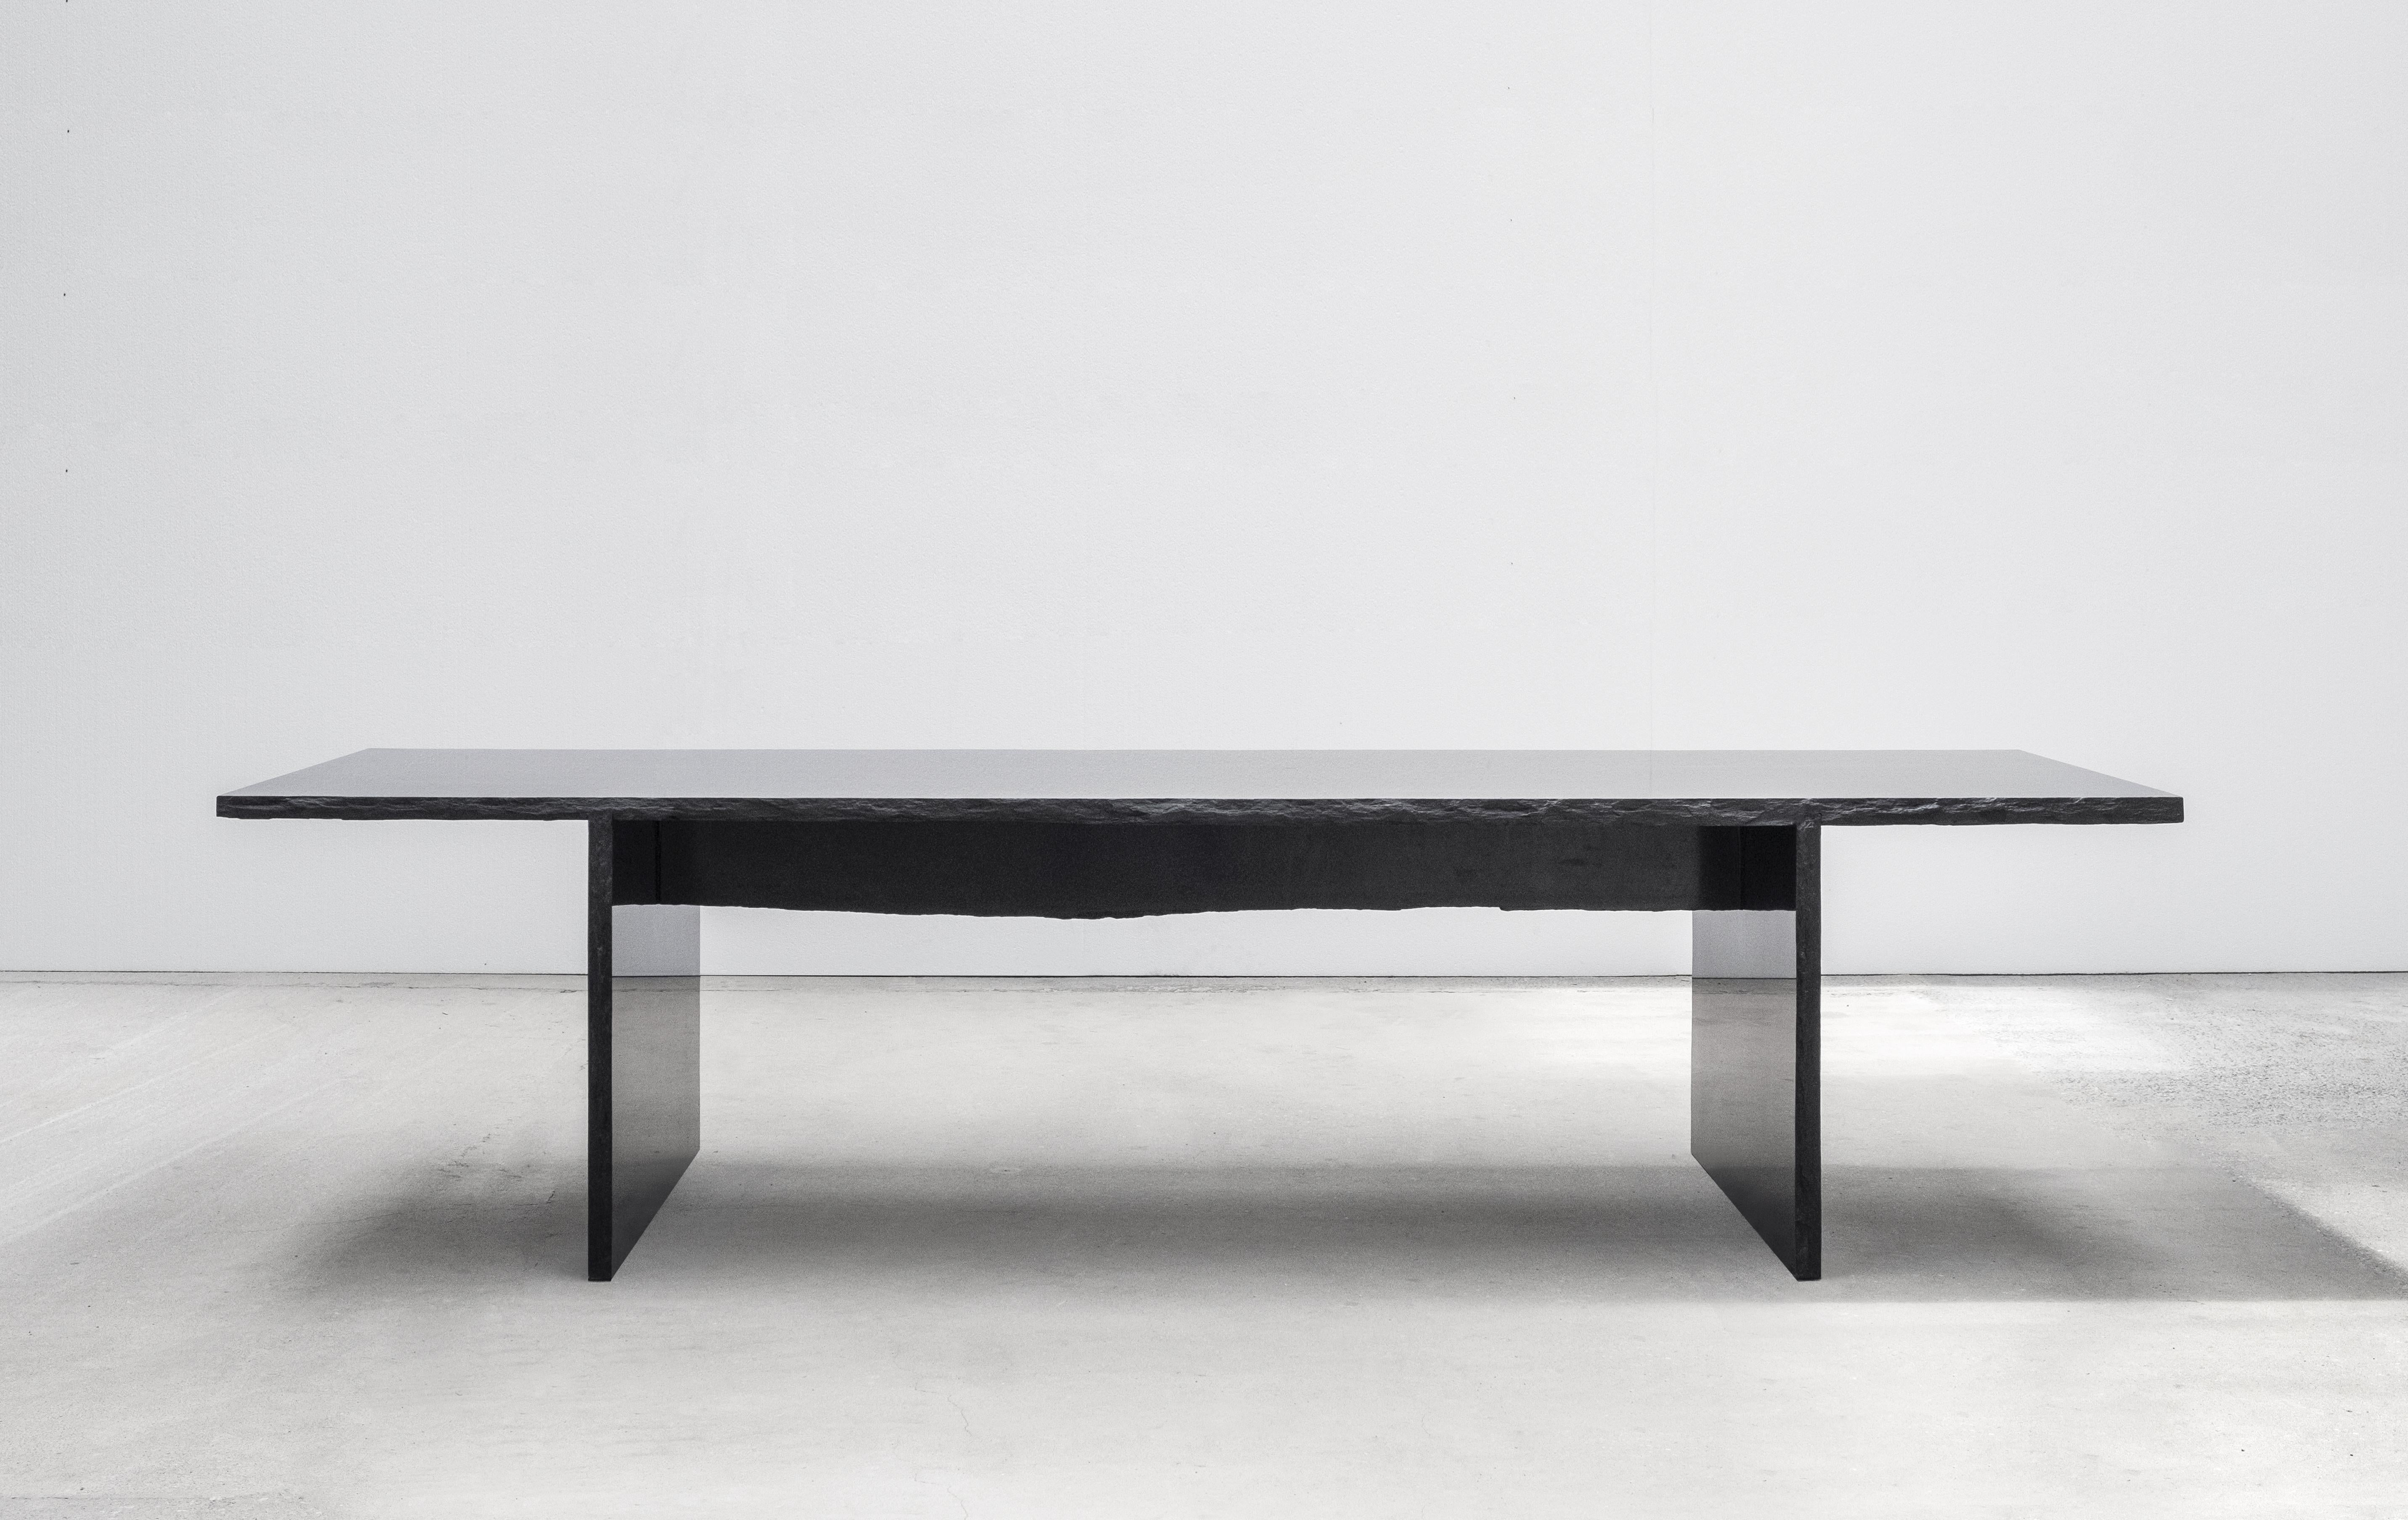 Marble Long Slate Dining Table Signed by Frédéric Saulou
Designer: Frédéric Saulou.
Materials: Trélazé black slate.
Dimensions: 75 x 300 x 110 cm
Edition of eight.
Signed and numbered.

